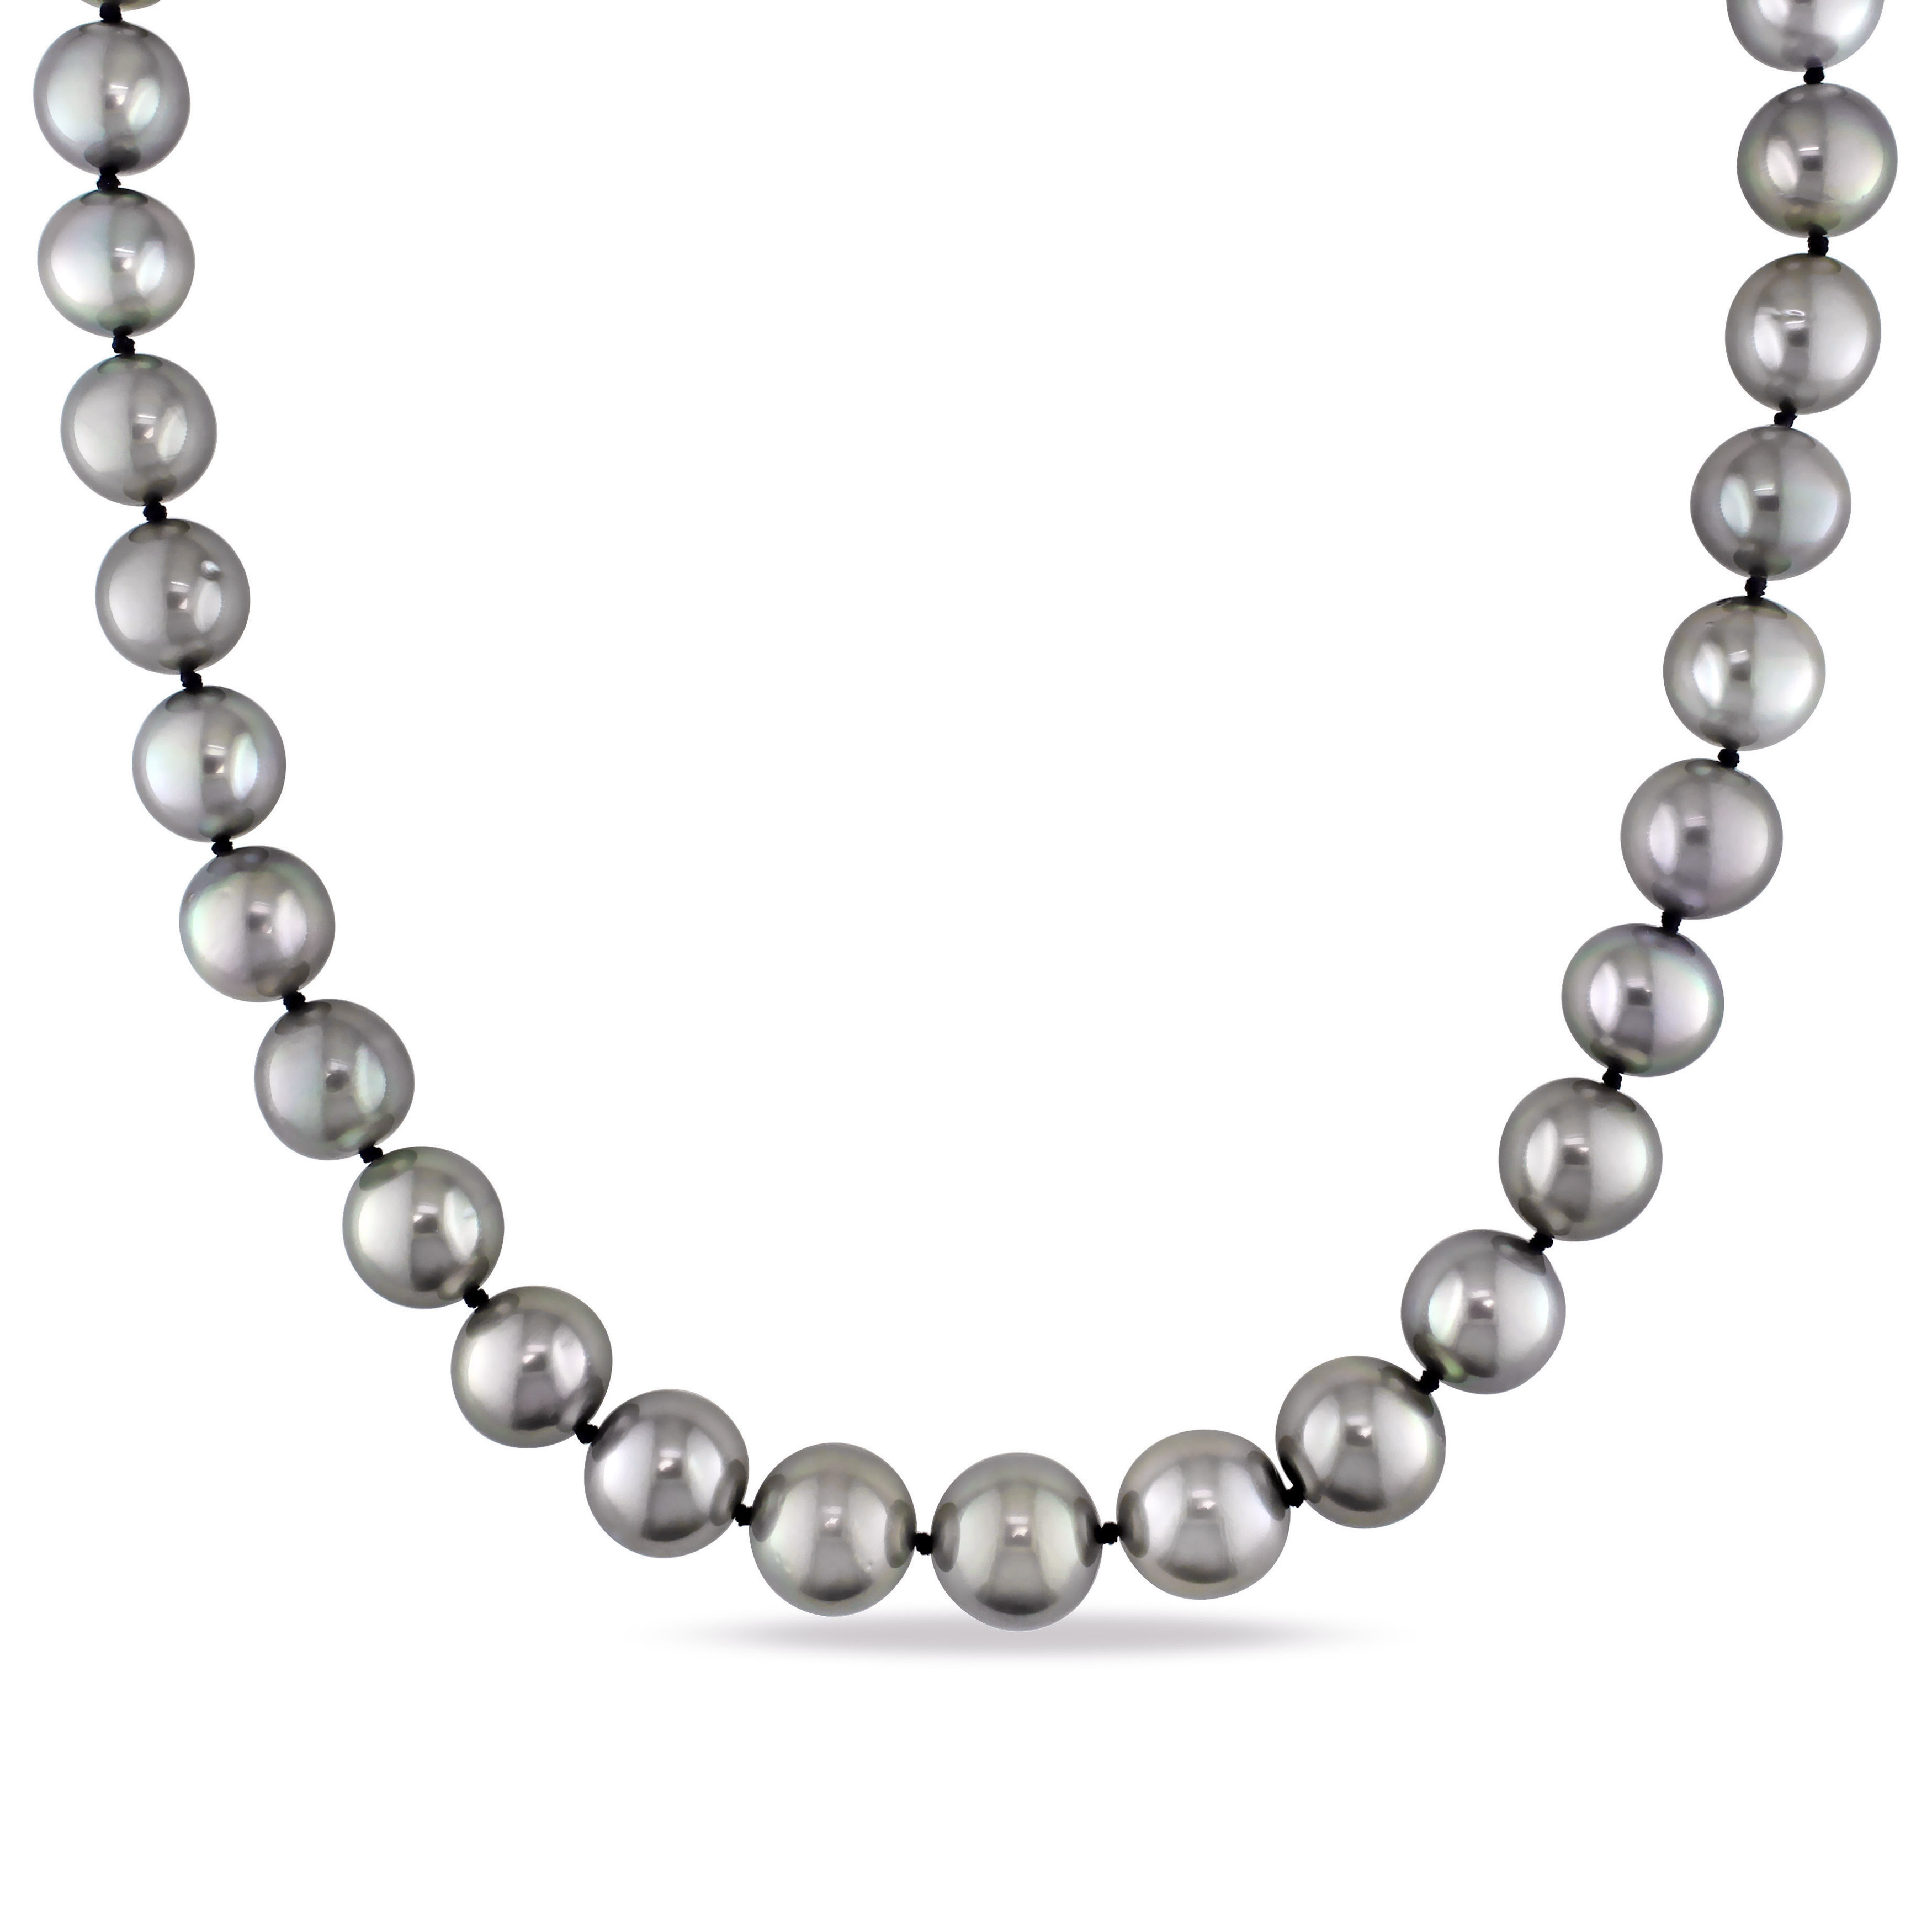 10-13 MM Graduated Black Tahitian Pearl Strand with 14k White Gold Ball Clasp - 18 in